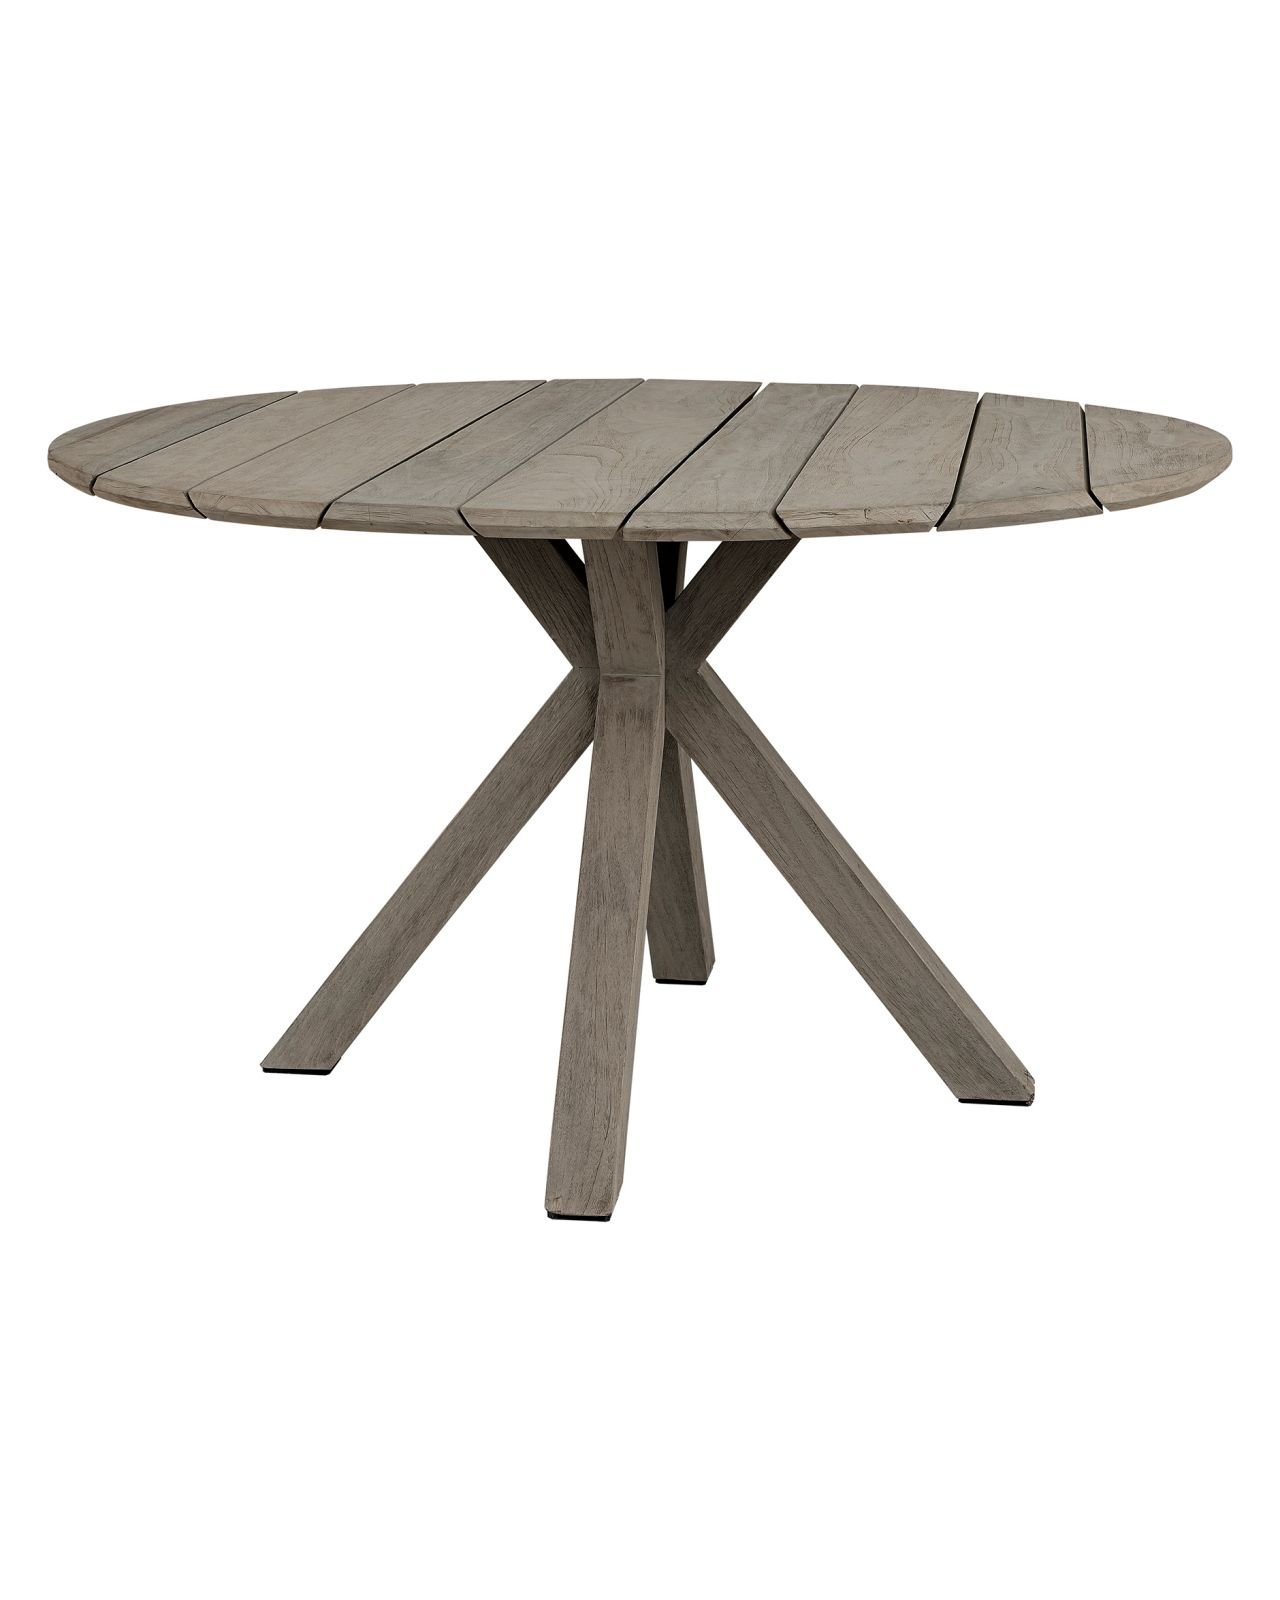 Macan Dining Table Charcoal Round